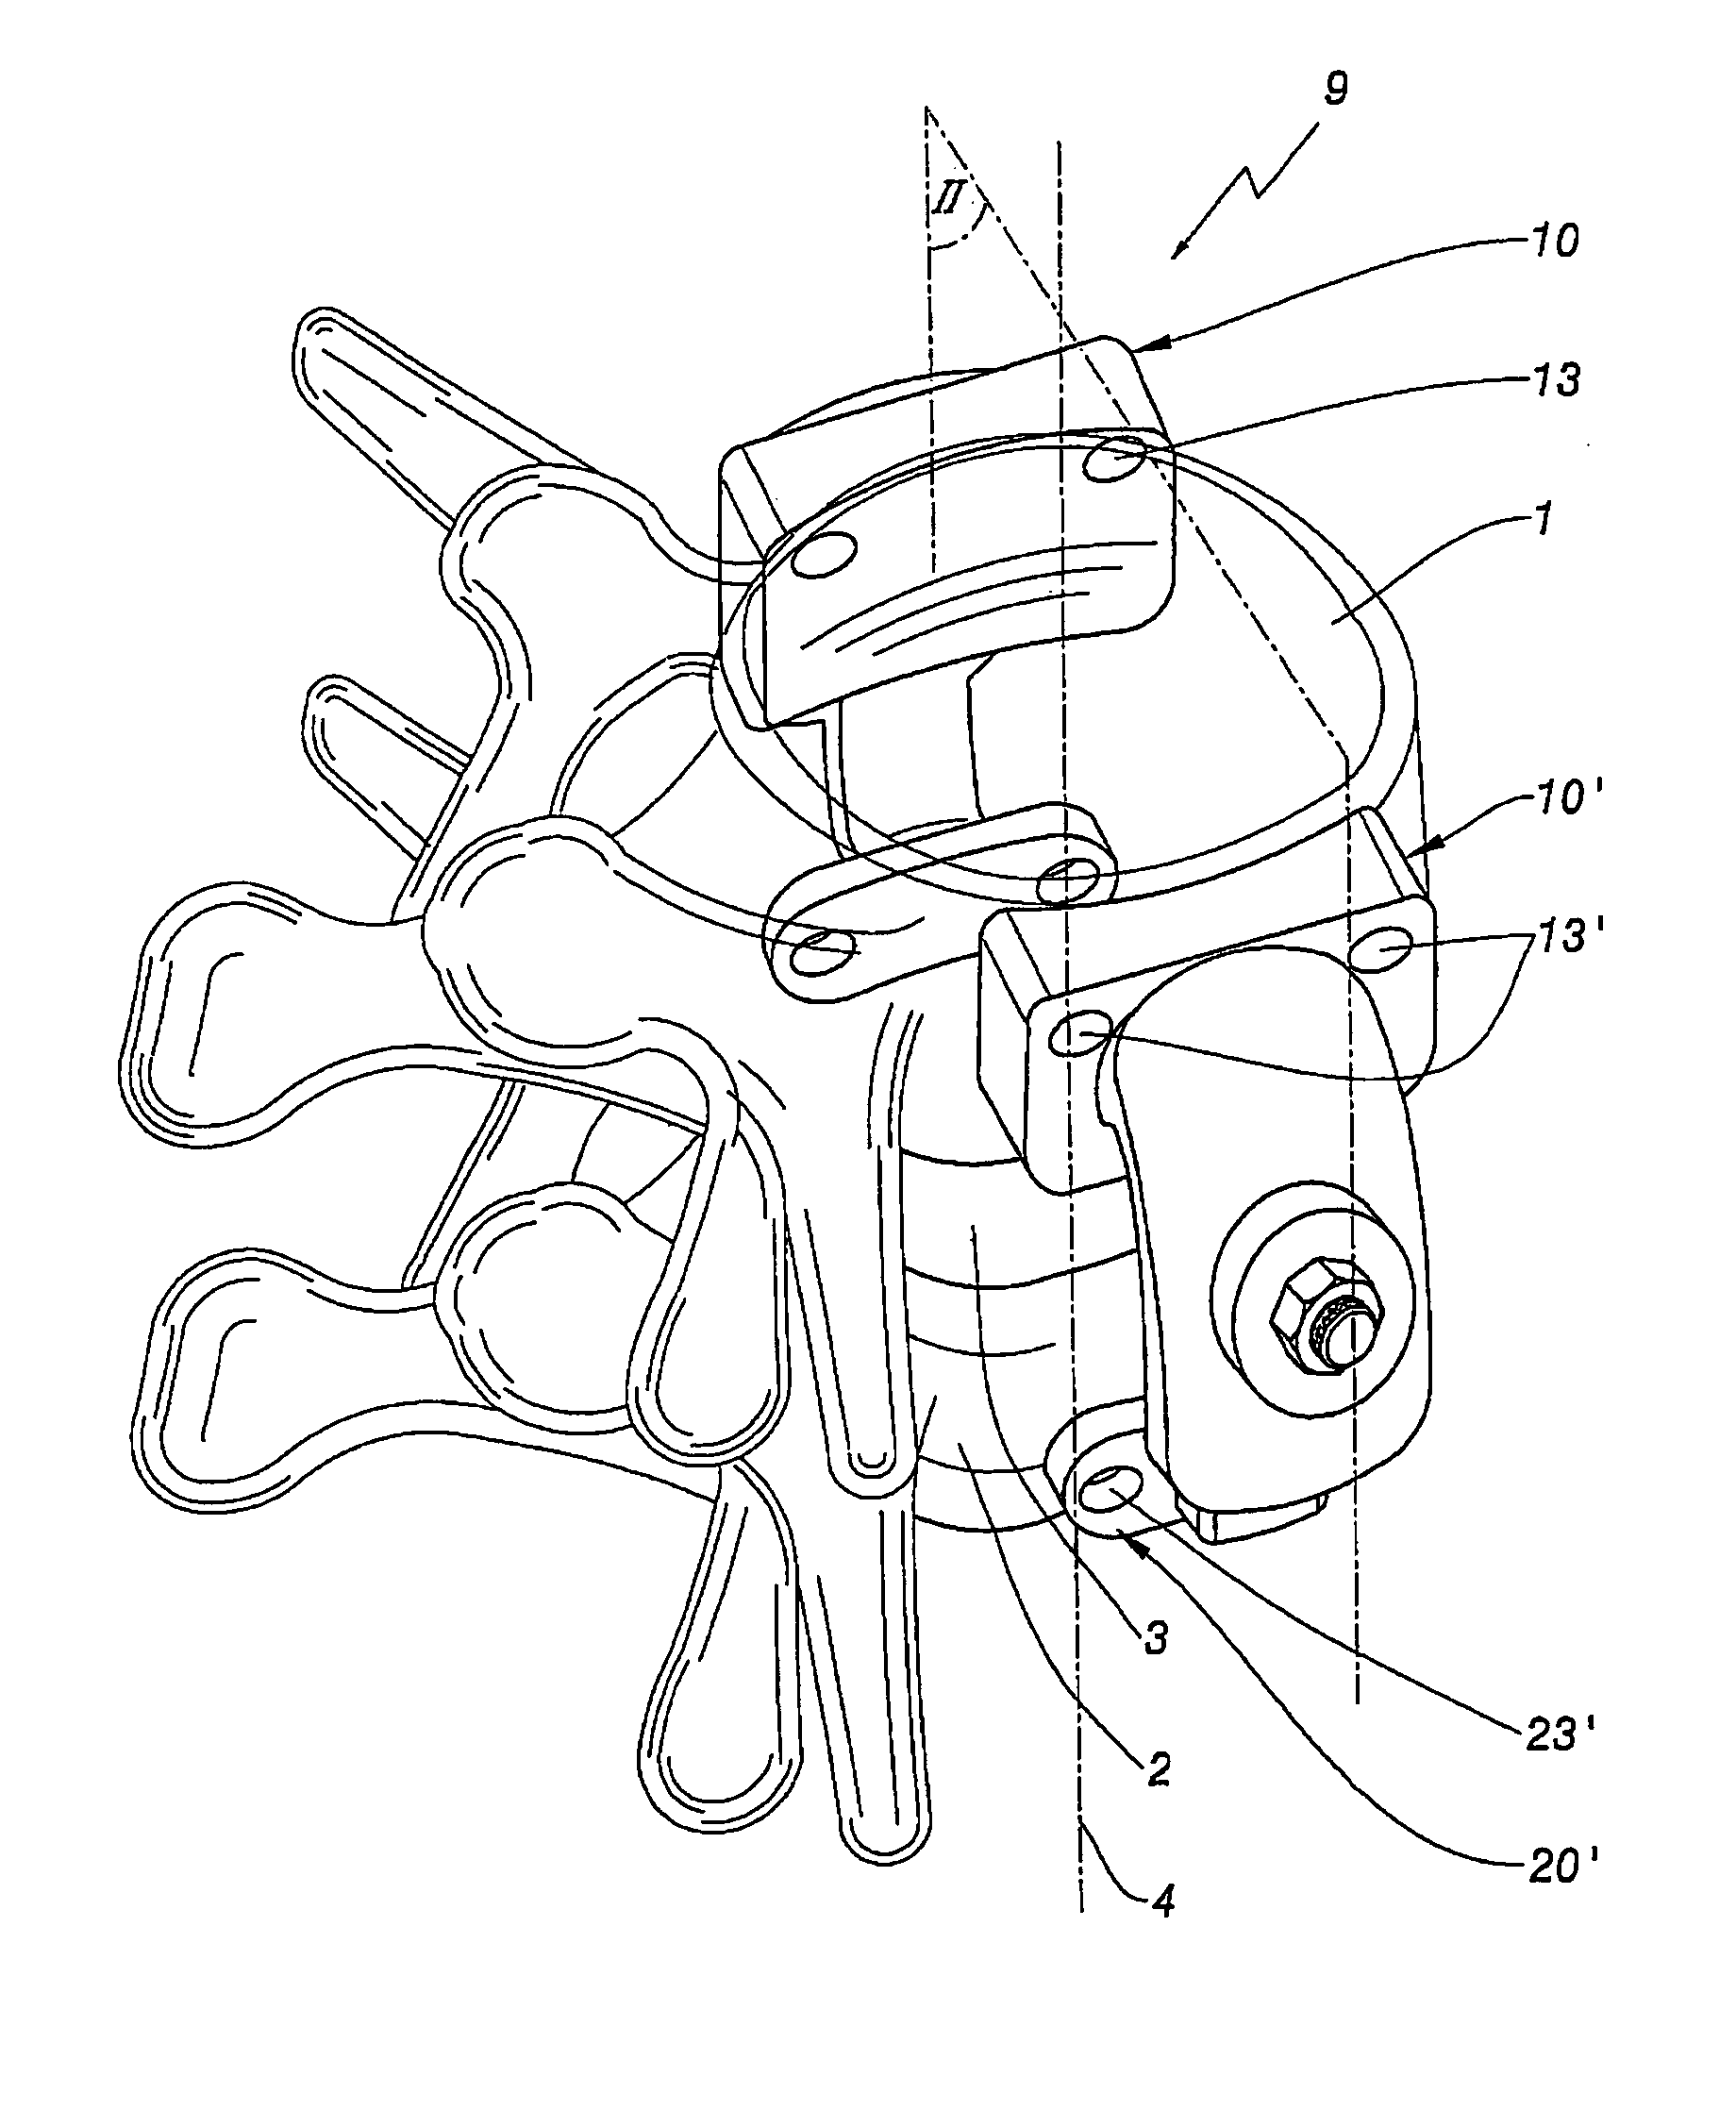 Device for the lateral stabilization of the spine